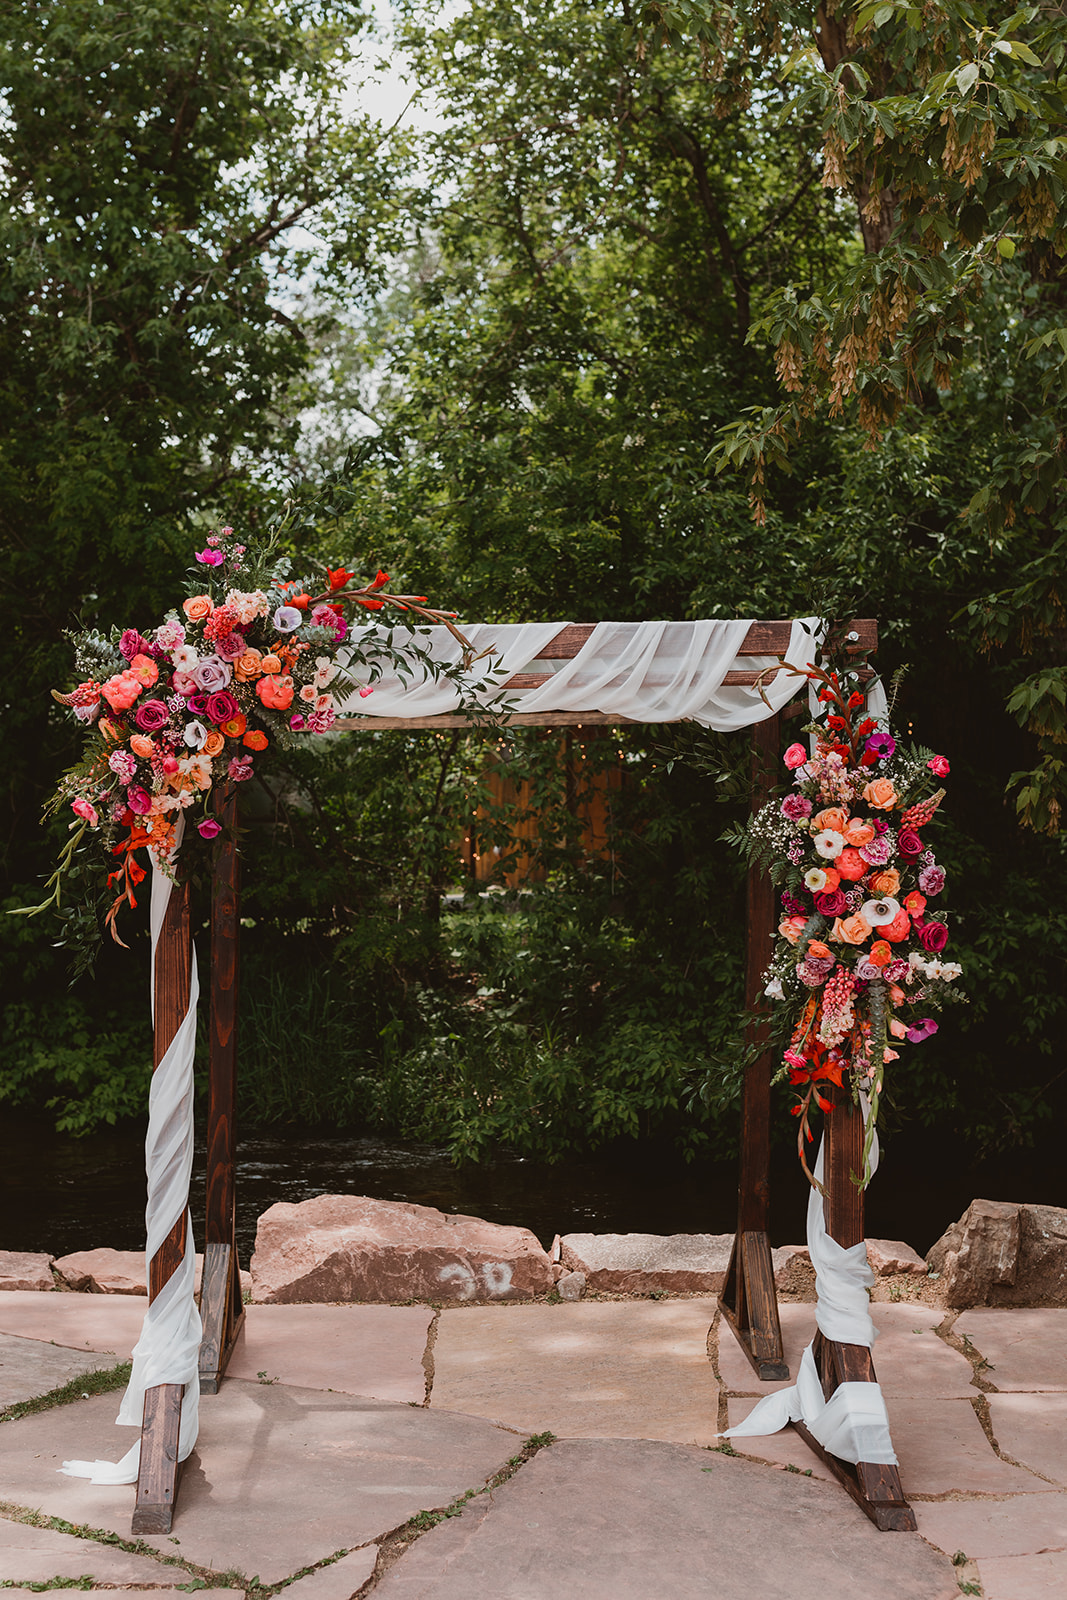 Stunning wooden arch adorned with white fabric and bright pink flowers in Denver Colorado at Lyons Farmette